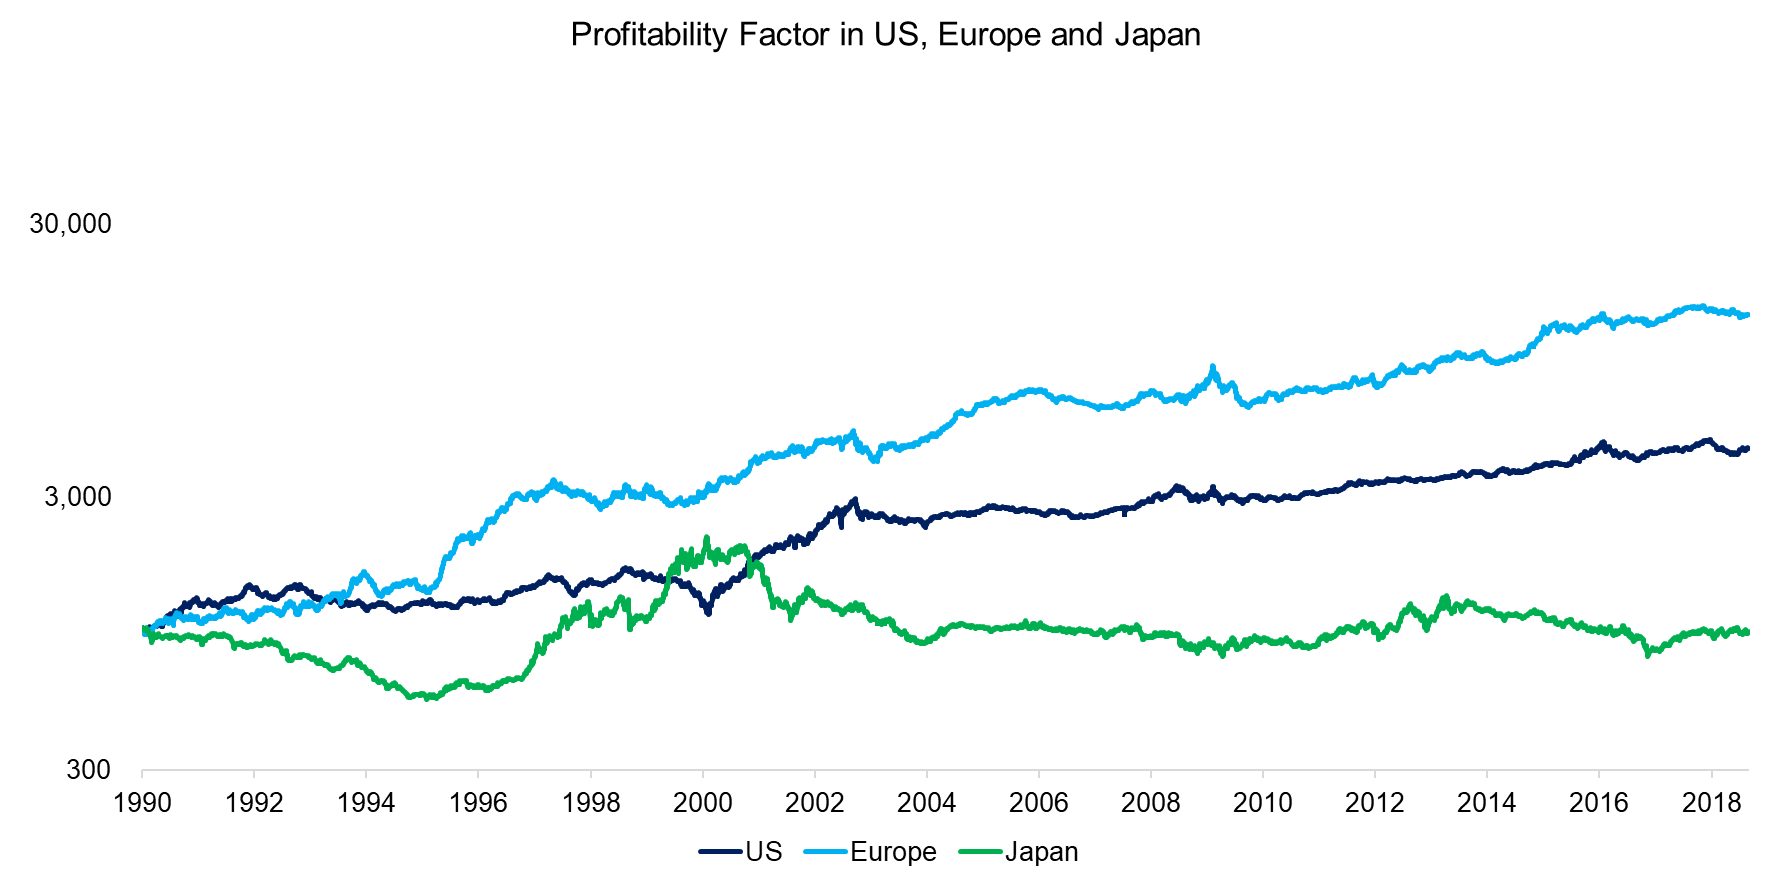 Profitability Factor in US, Europe and Japan